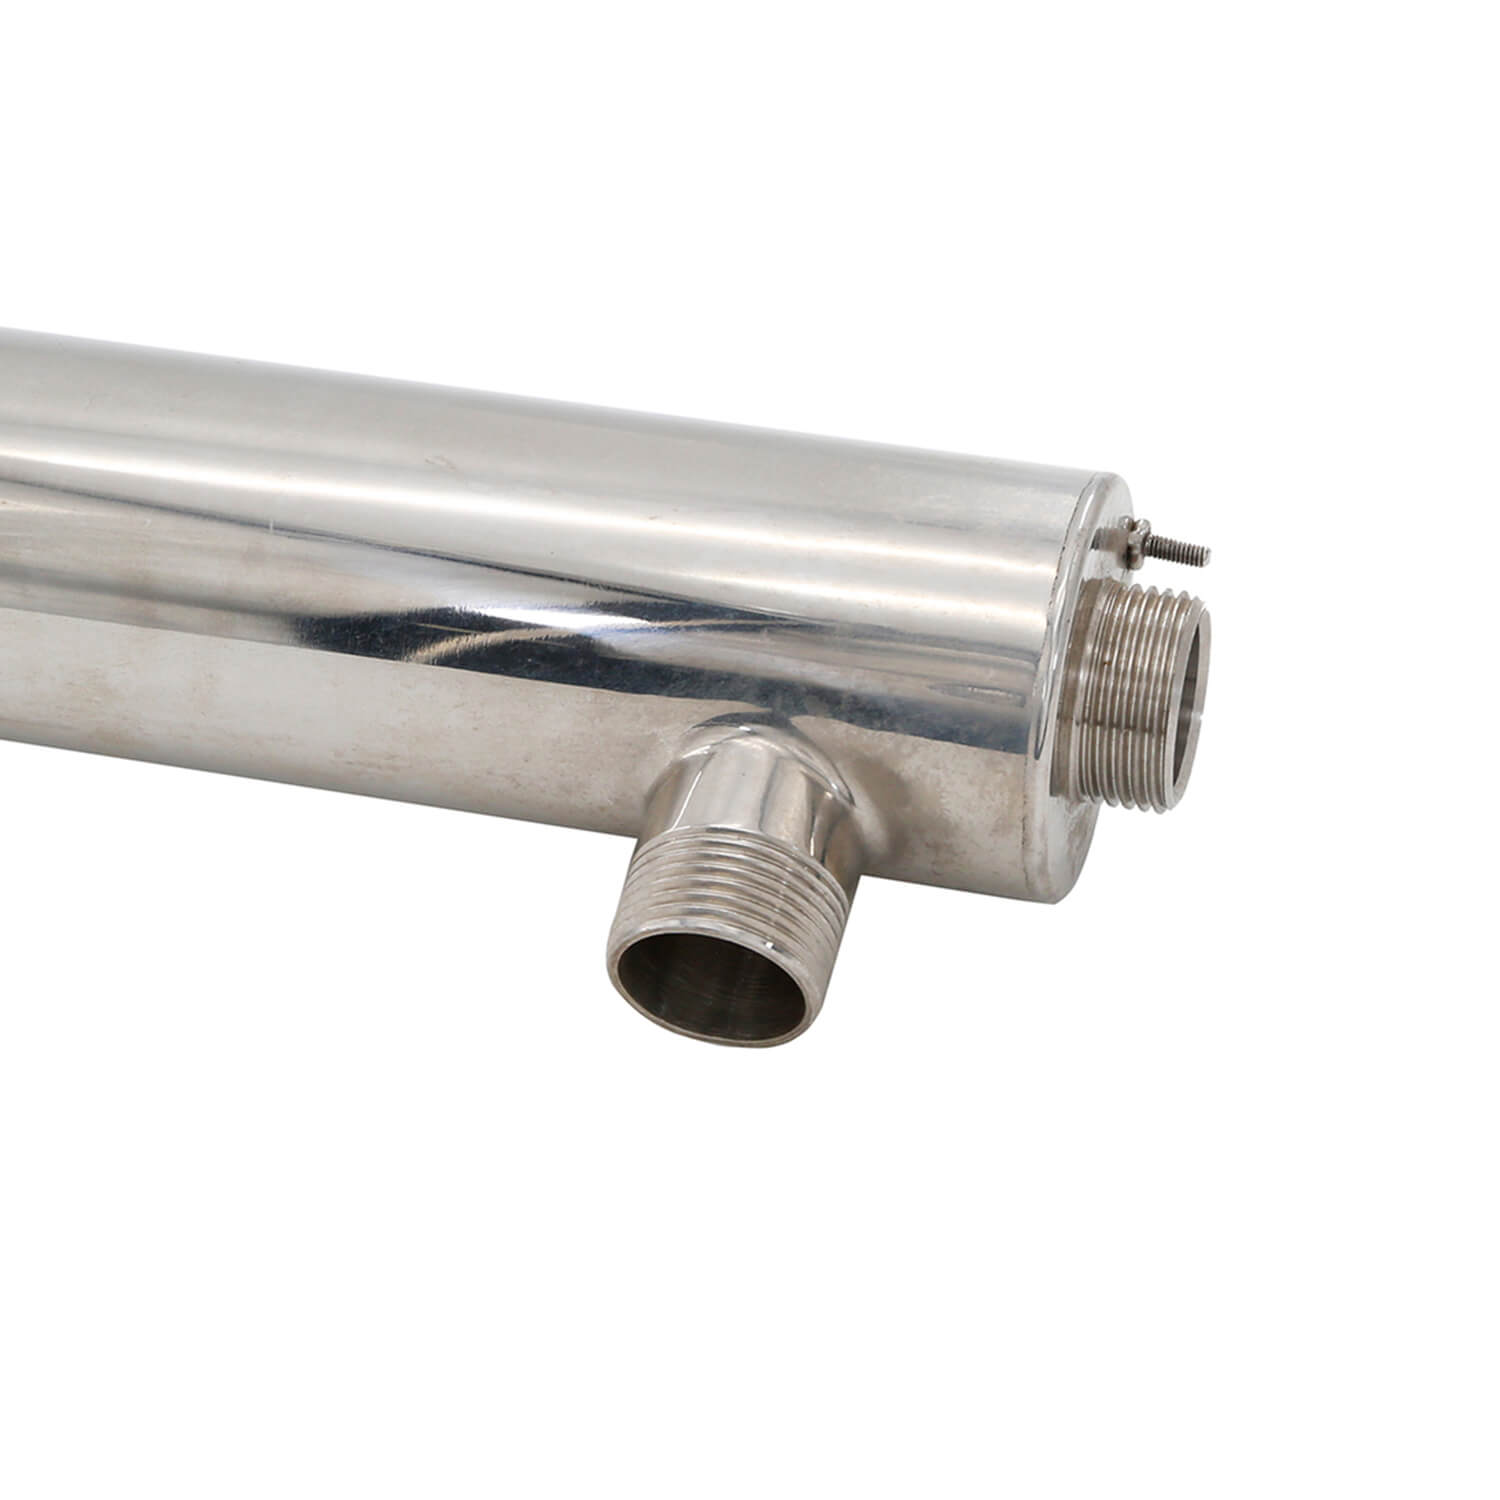 Stainless Steel Ultraviolet Sterilizer Shell For Disinfection System